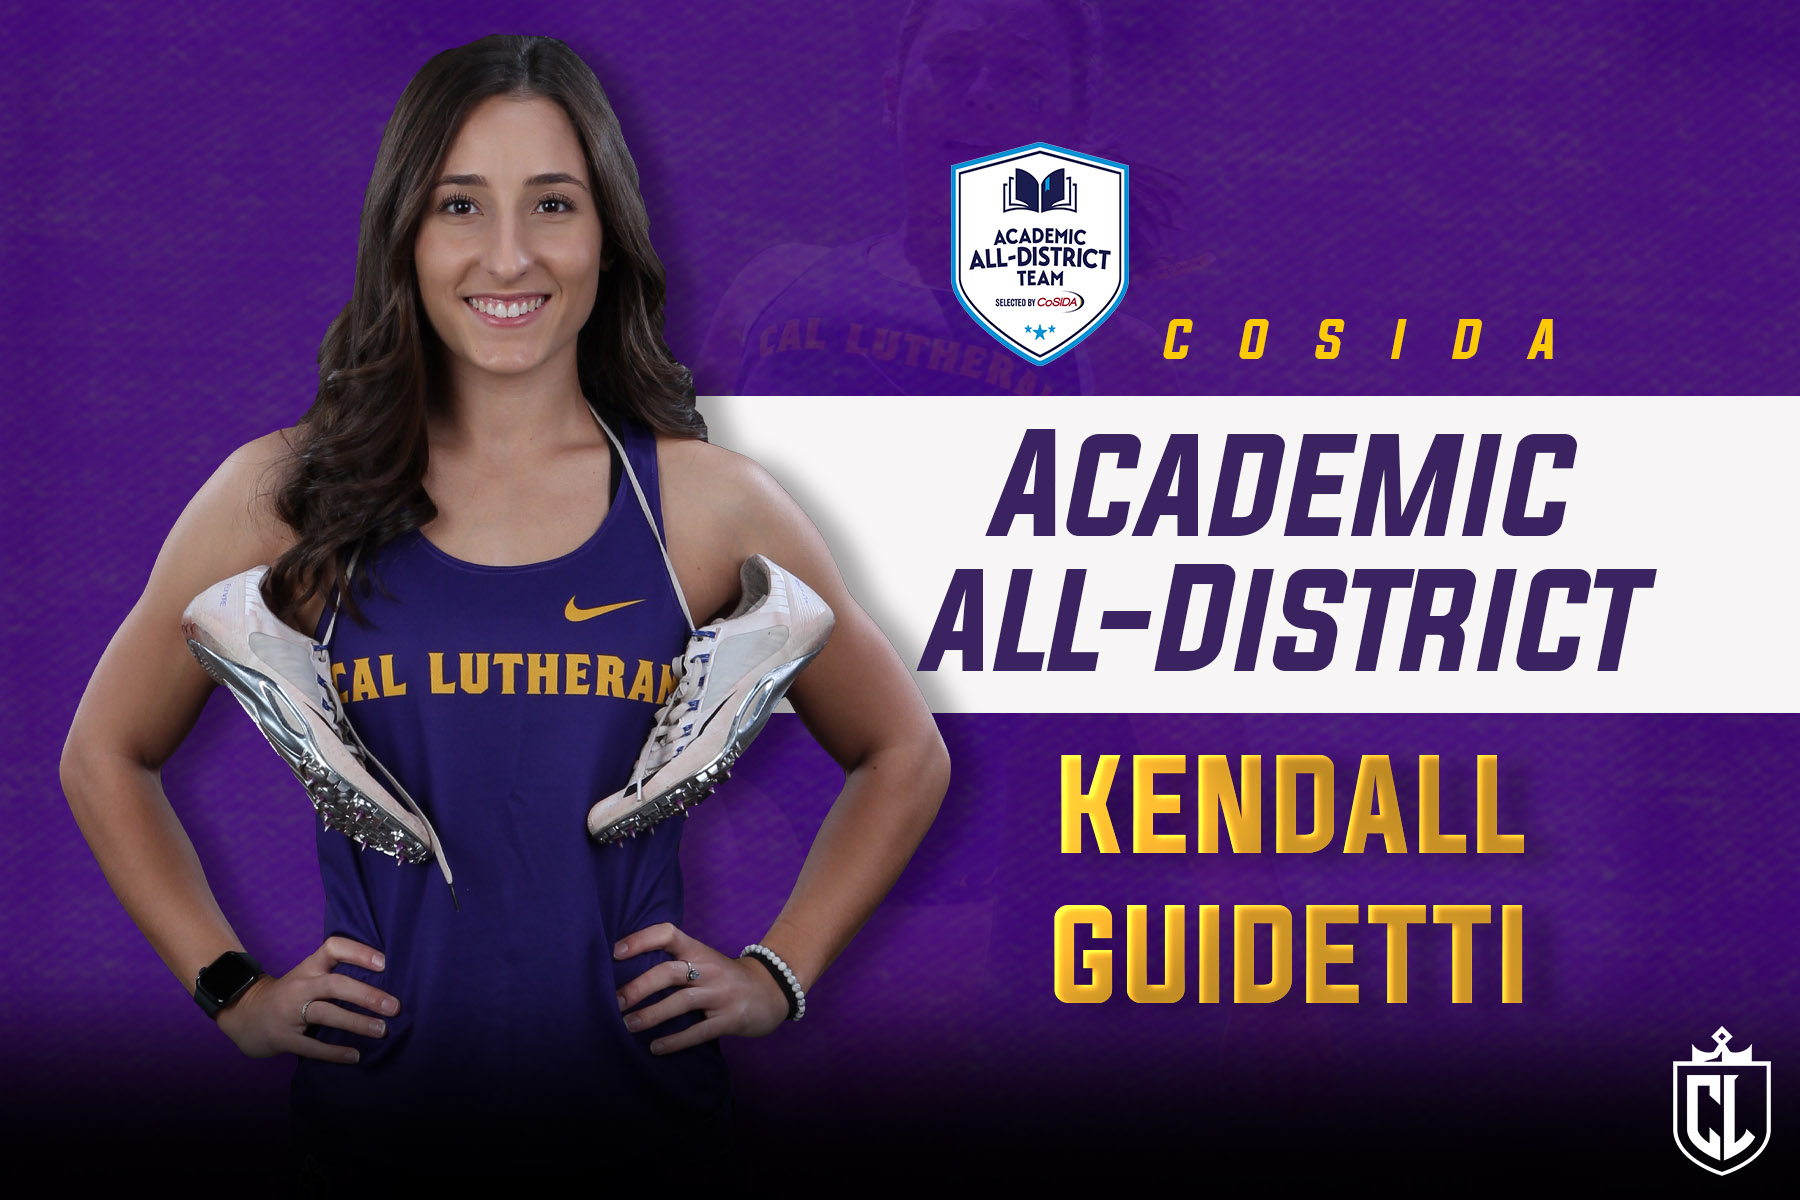 Guidetti Named CoSIDA Academic All-District